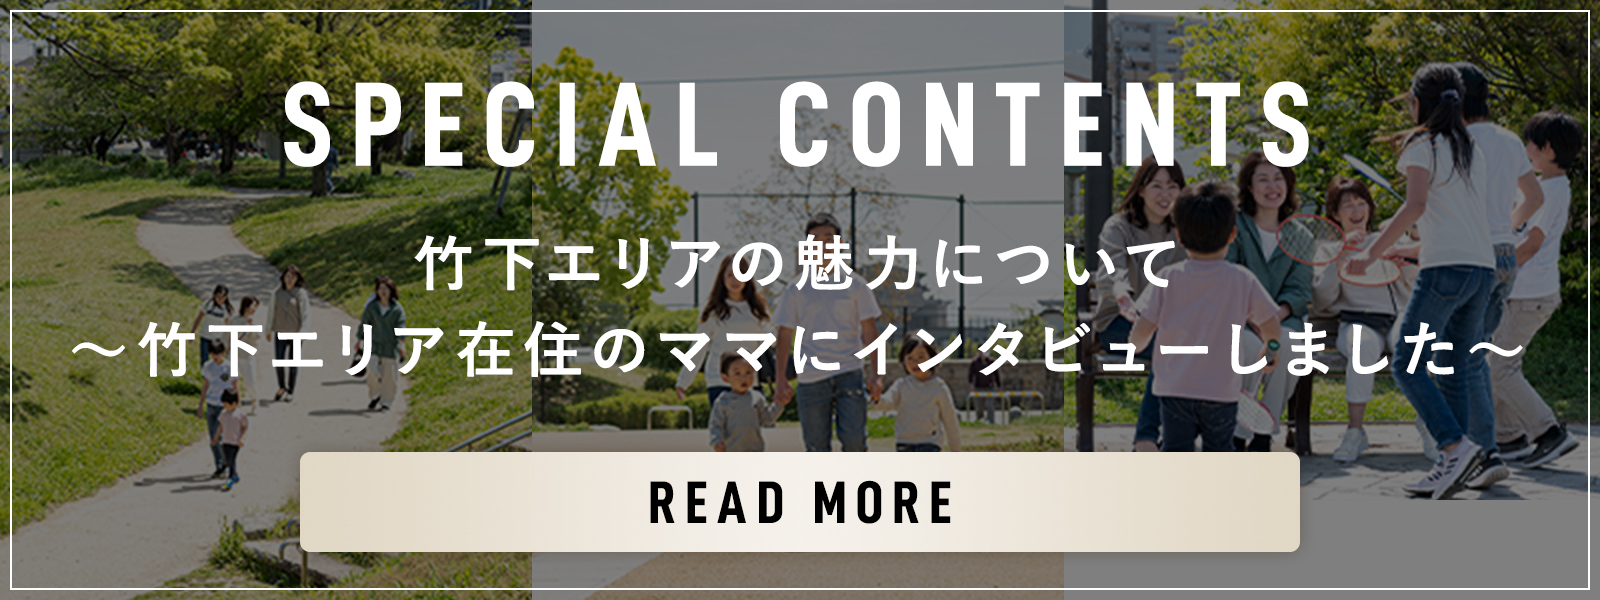 SPECIAL CONTENTS 竹下エリアの魅力について